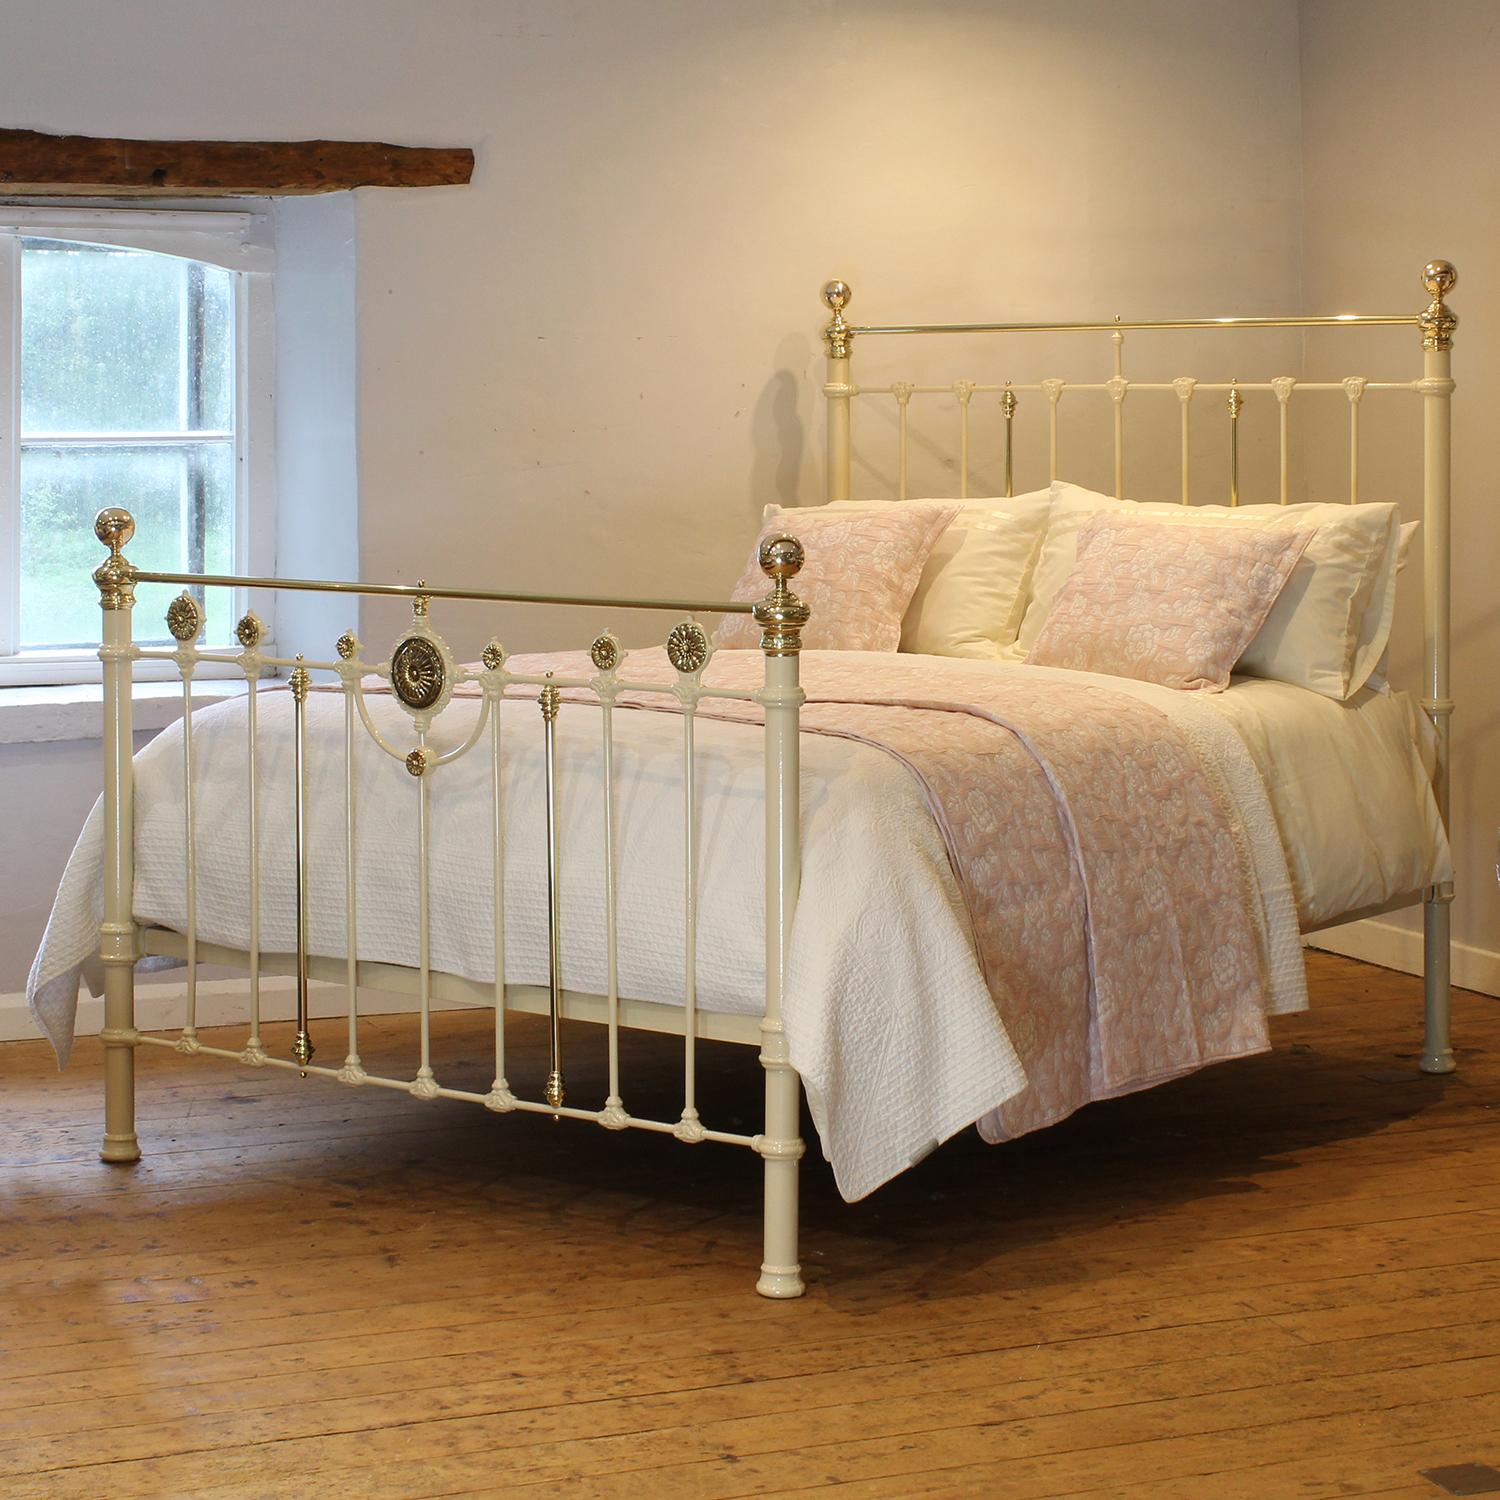 An attractive cast iron Victorian antique bed finished in cream with rosette decoration on the foot panel.

This bed accepts a UK king size or US queen size (5ft, 60in or 150cm wide) base and mattress set.

The price includes a standard firm bed